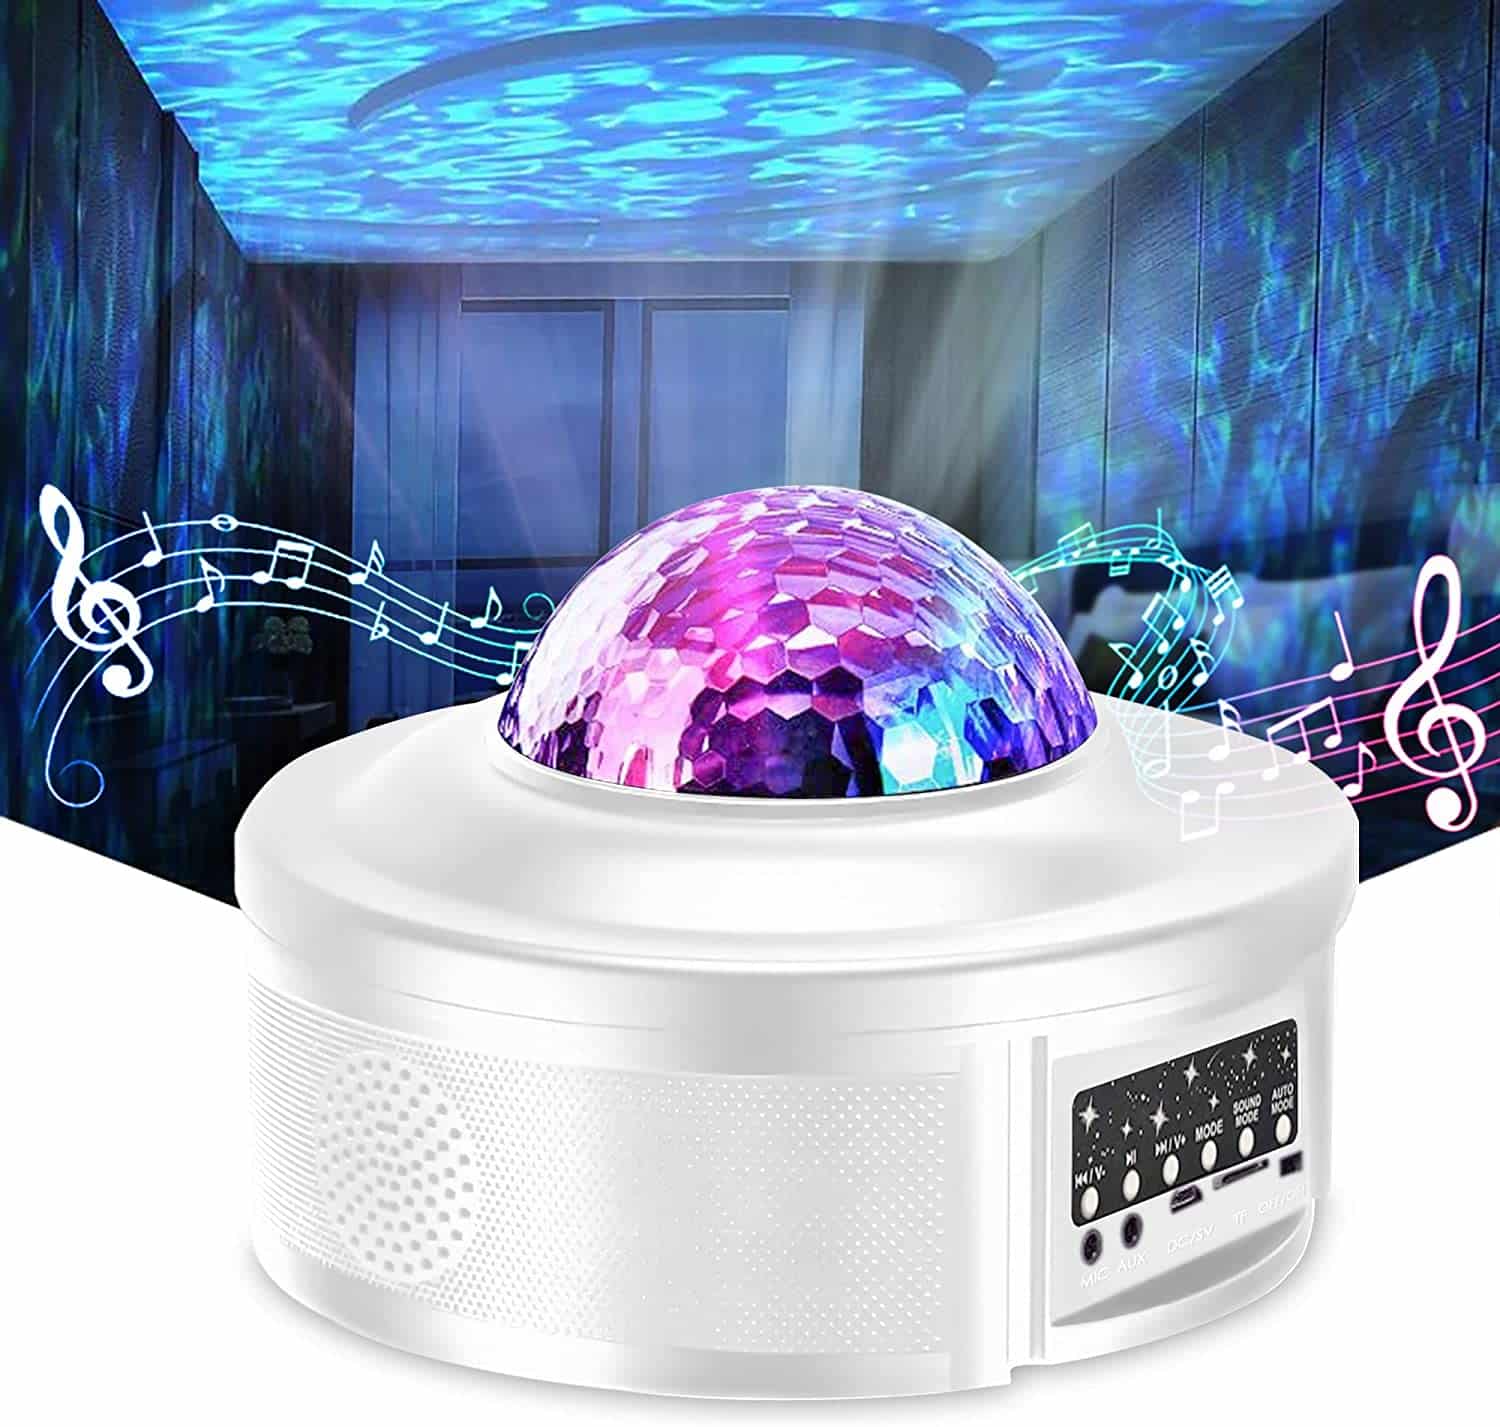 Amazon: Free Star Projector just use the code at checkout (Reg. $39.99